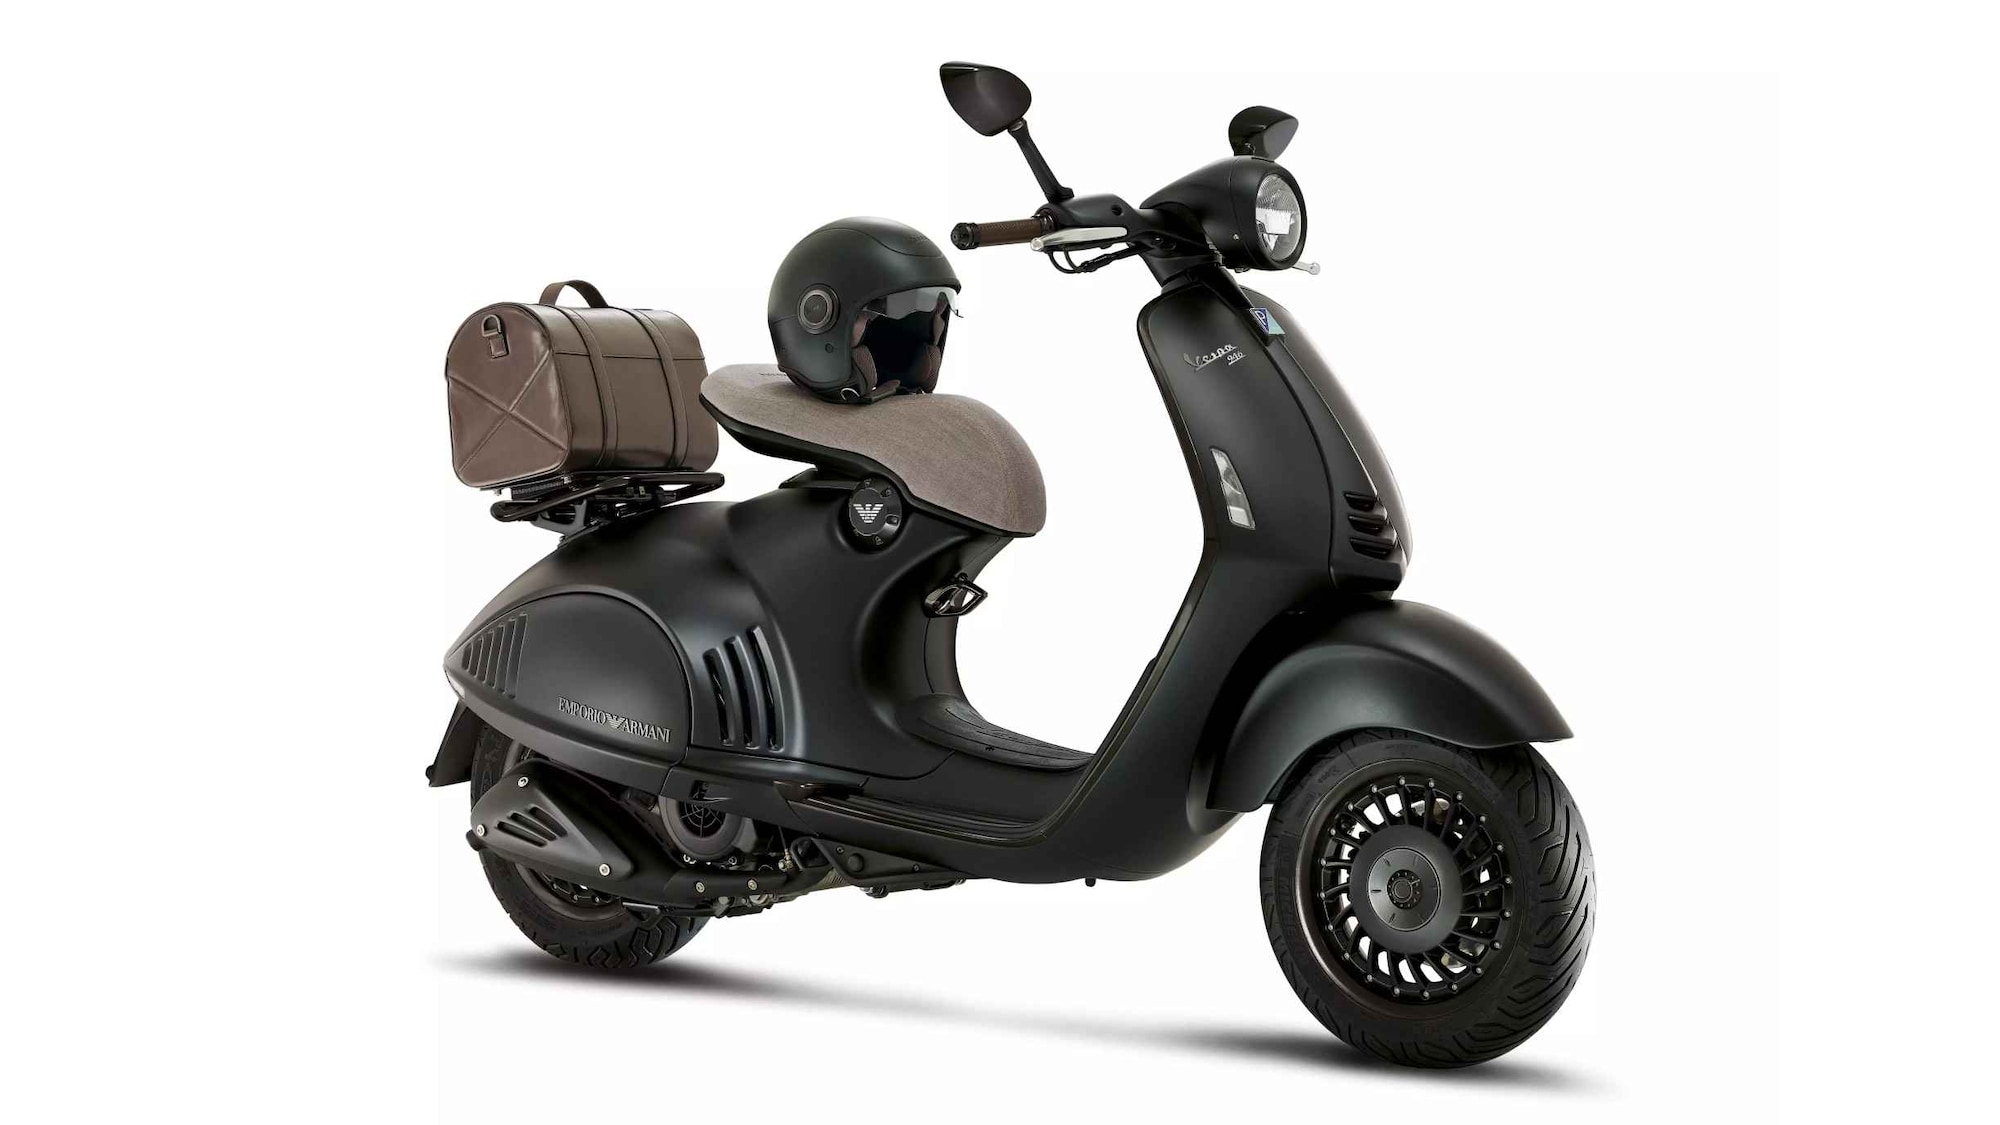 Even at its astonishing price of Rs 12 lakh, the Vespa 946 Emporio Armani found some buyers in India. Image: Piaggio